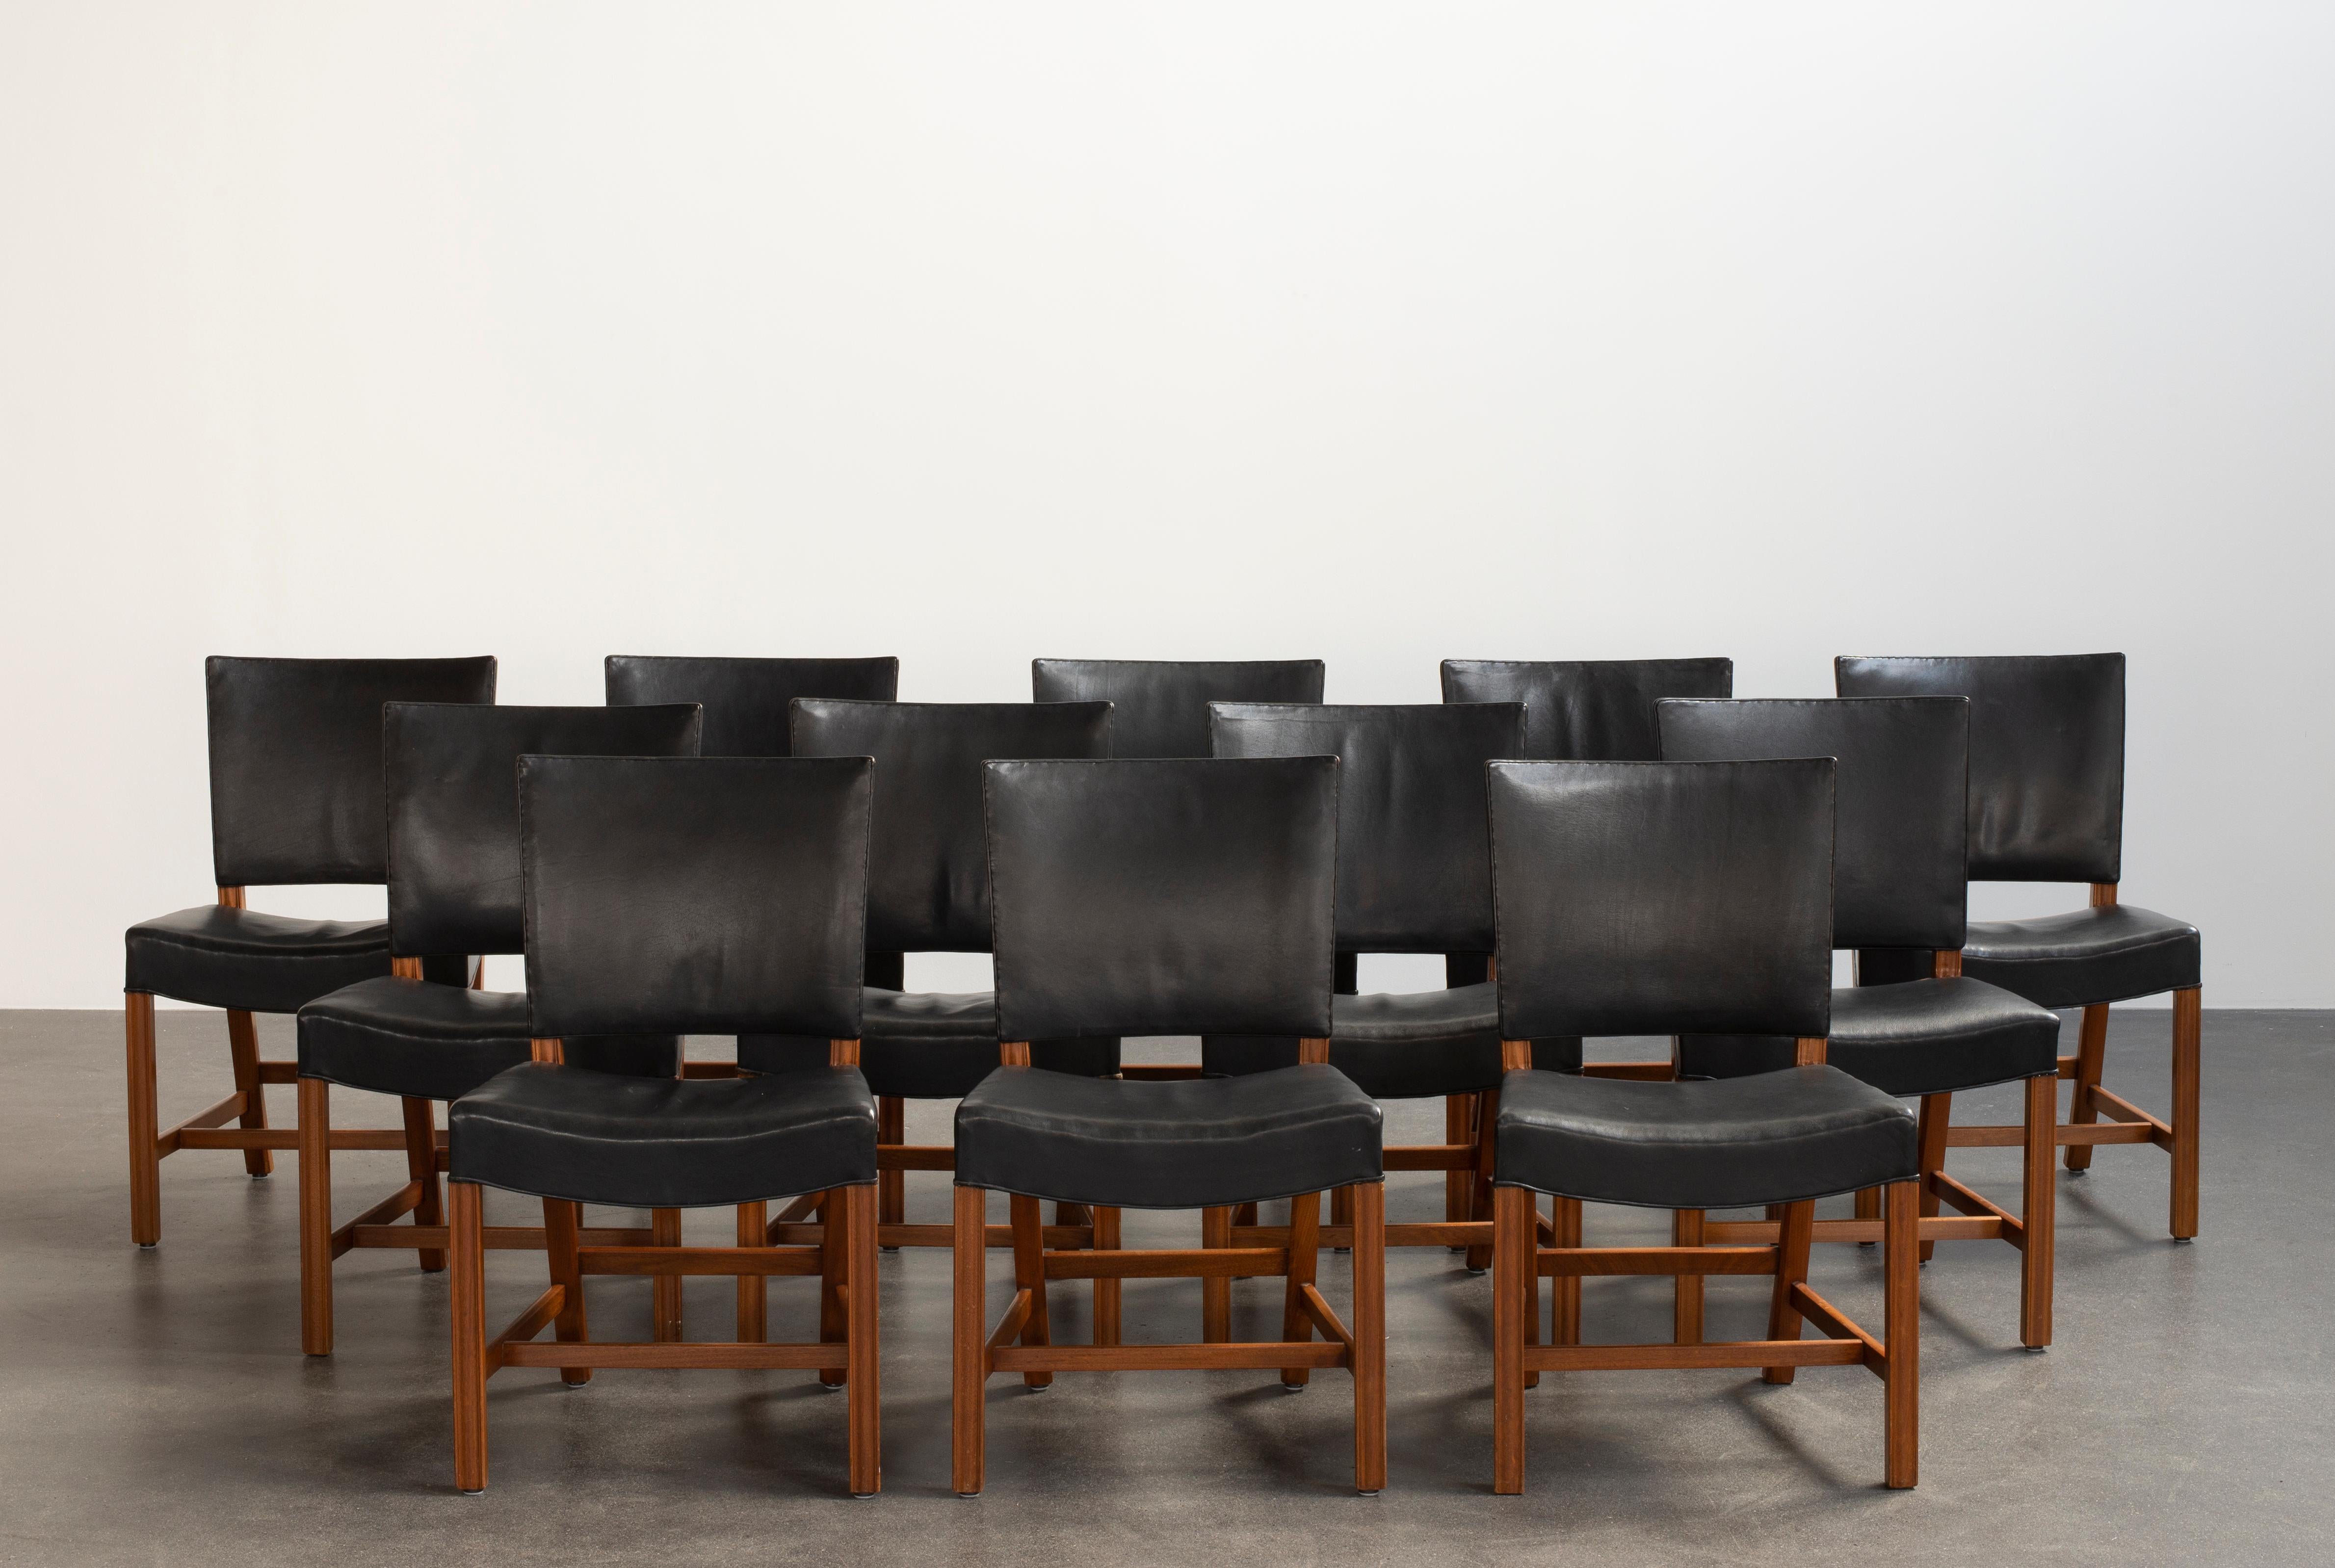 Kaare Klint set of 12 Red chairs in mahogany and leather. Executed by Rud. Rasmussen.